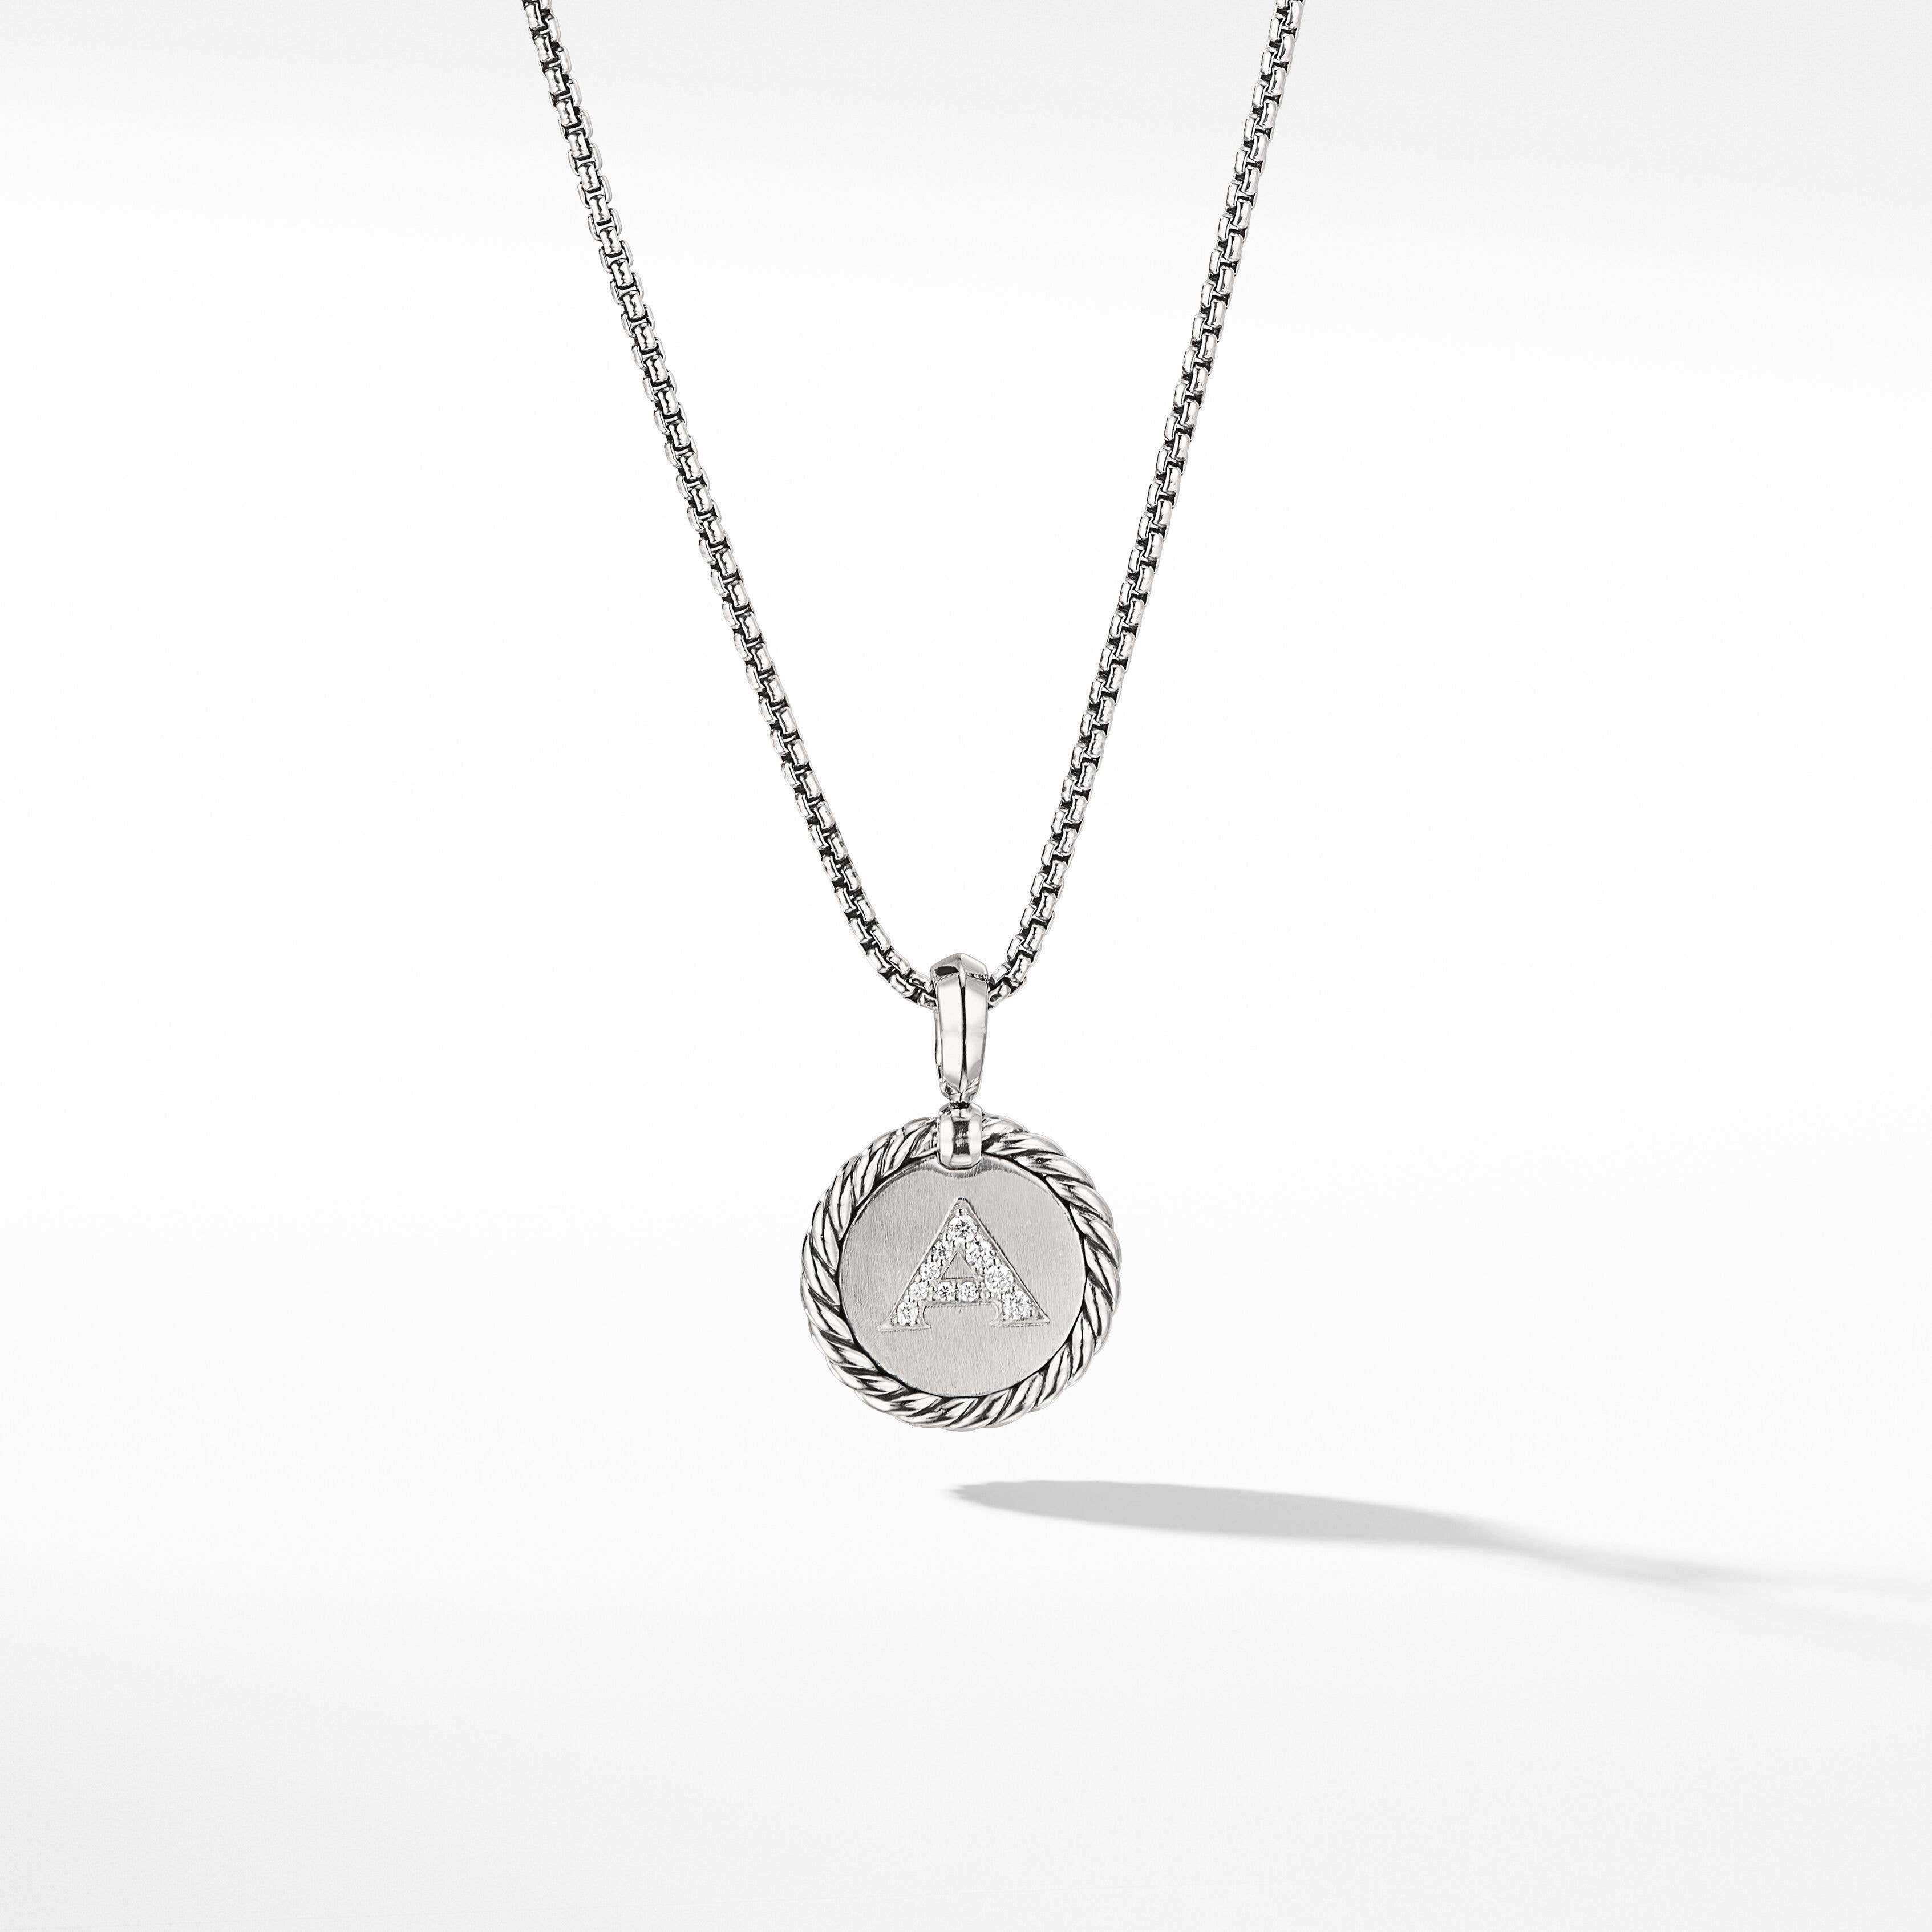 A Initial Charm in Sterling Silver with Pavé Diamonds